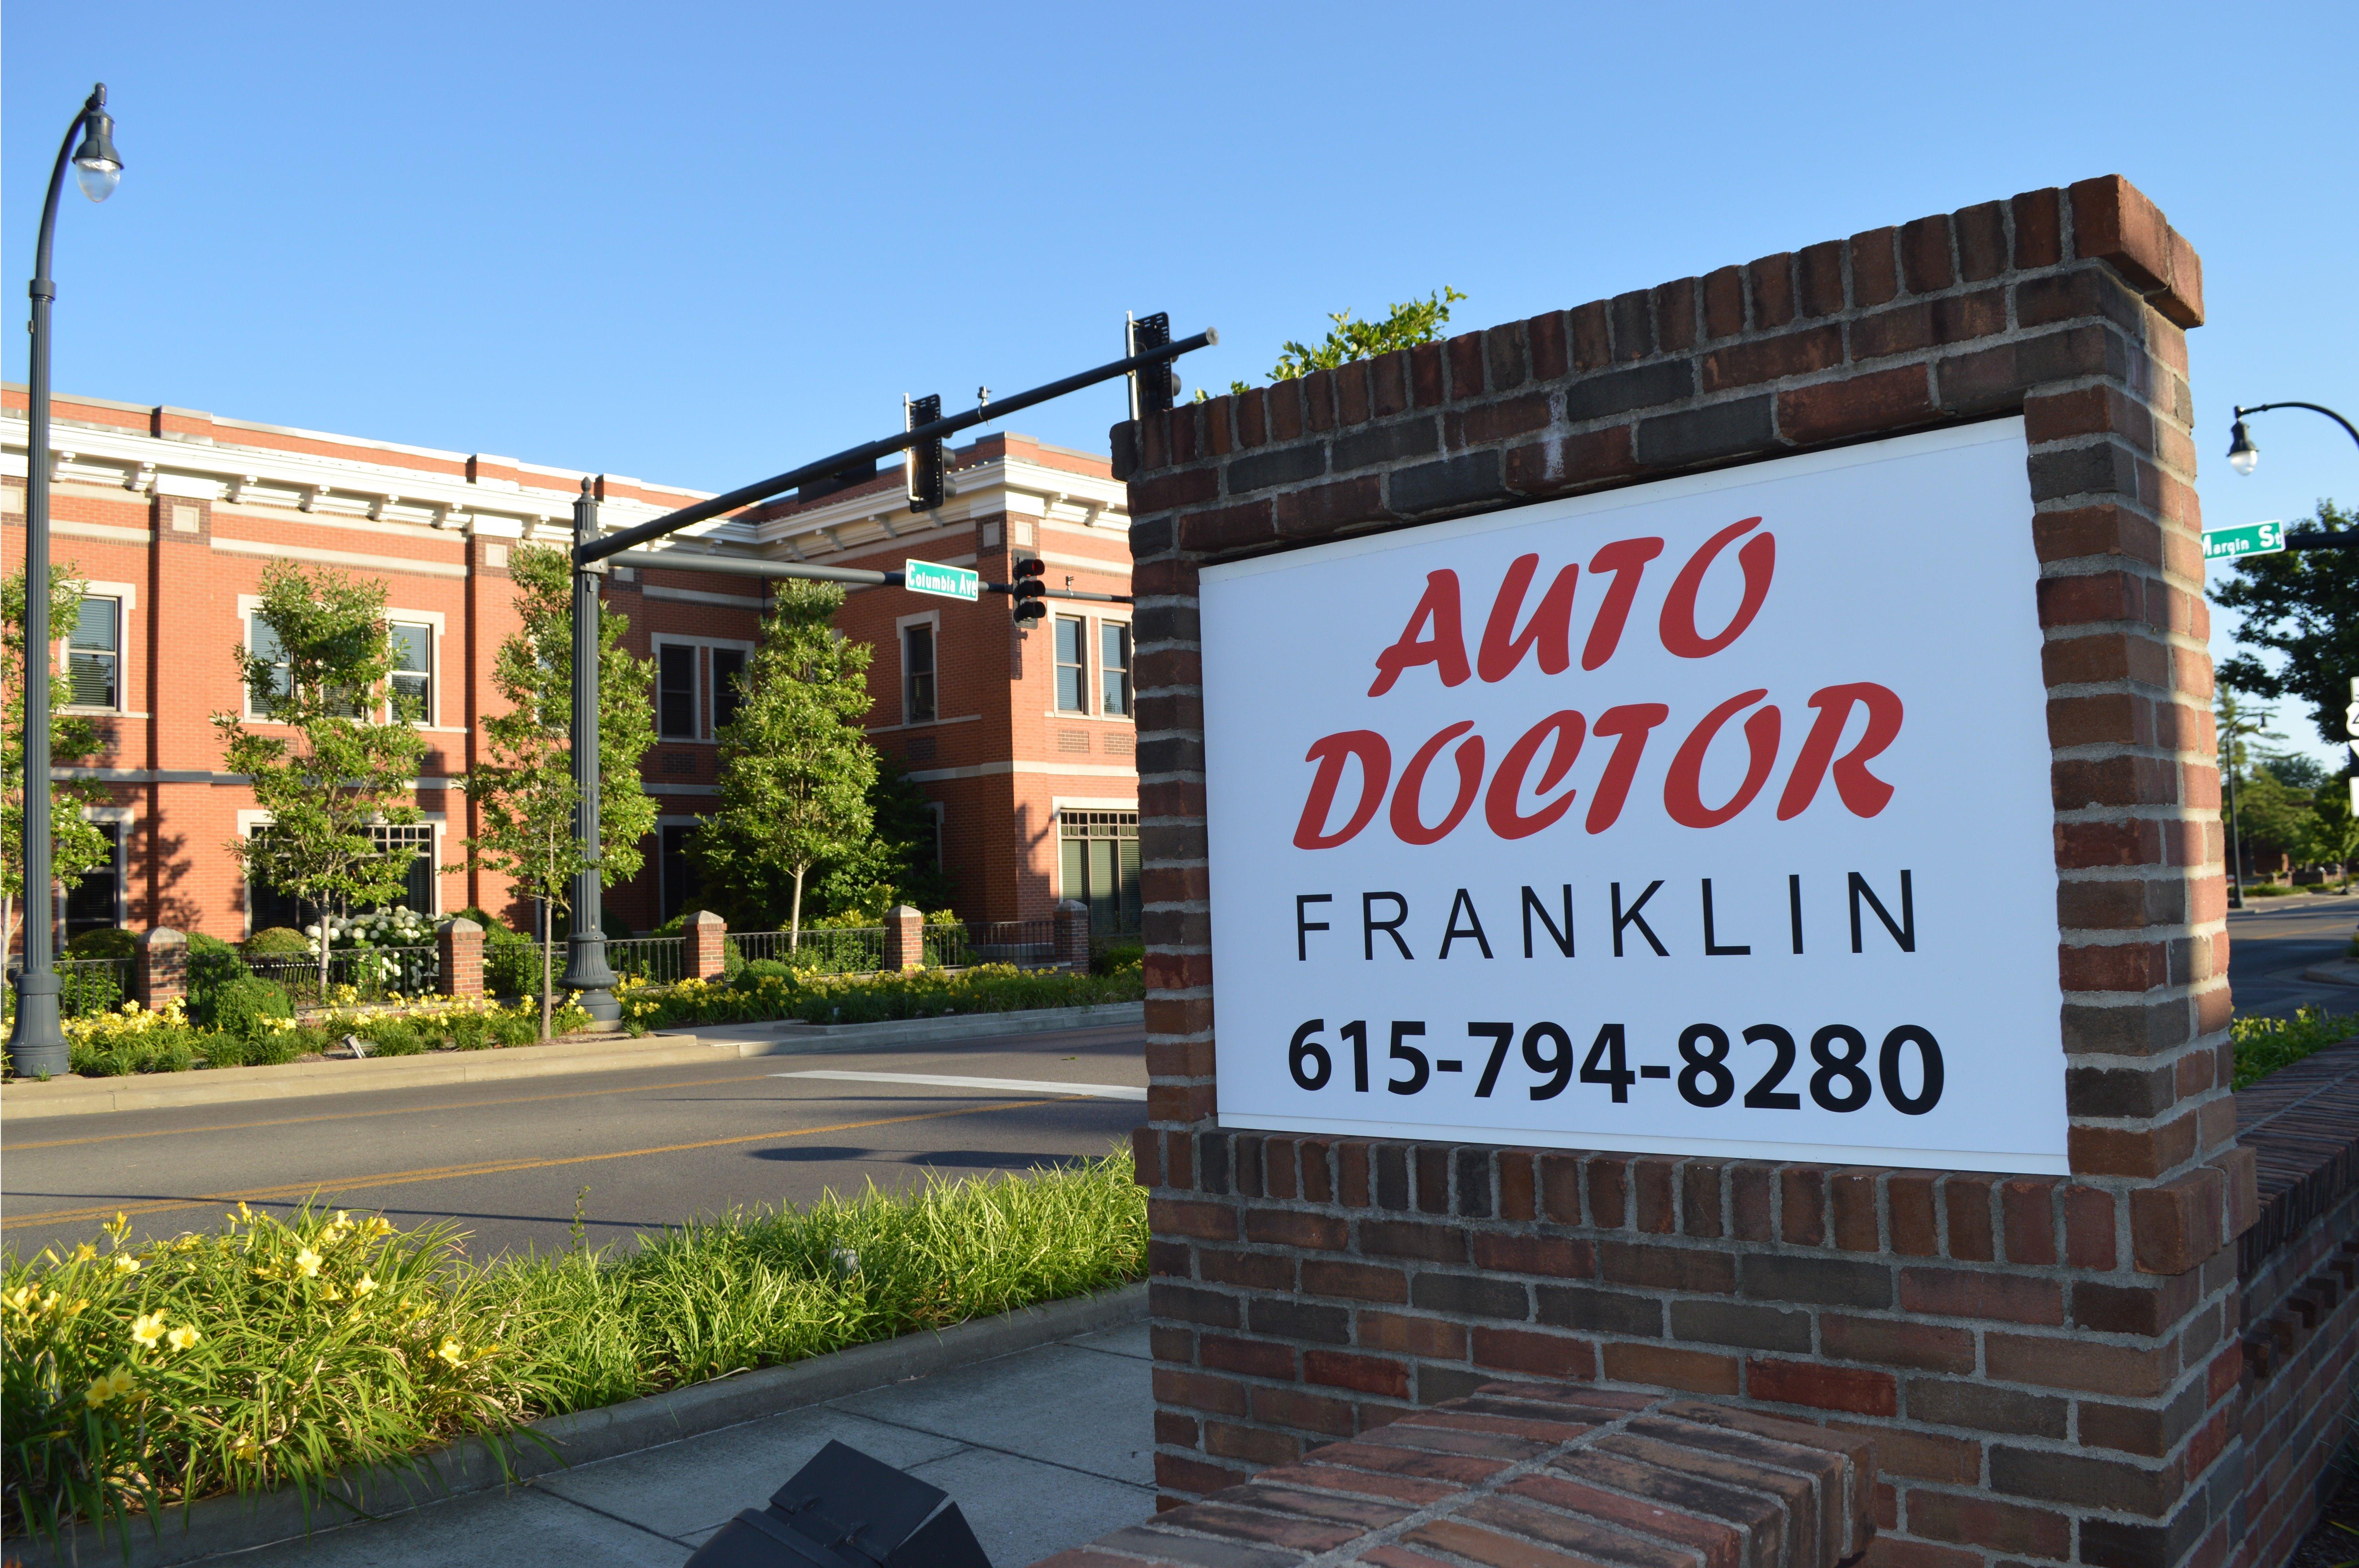 Auto Doctor of Franklin Photo